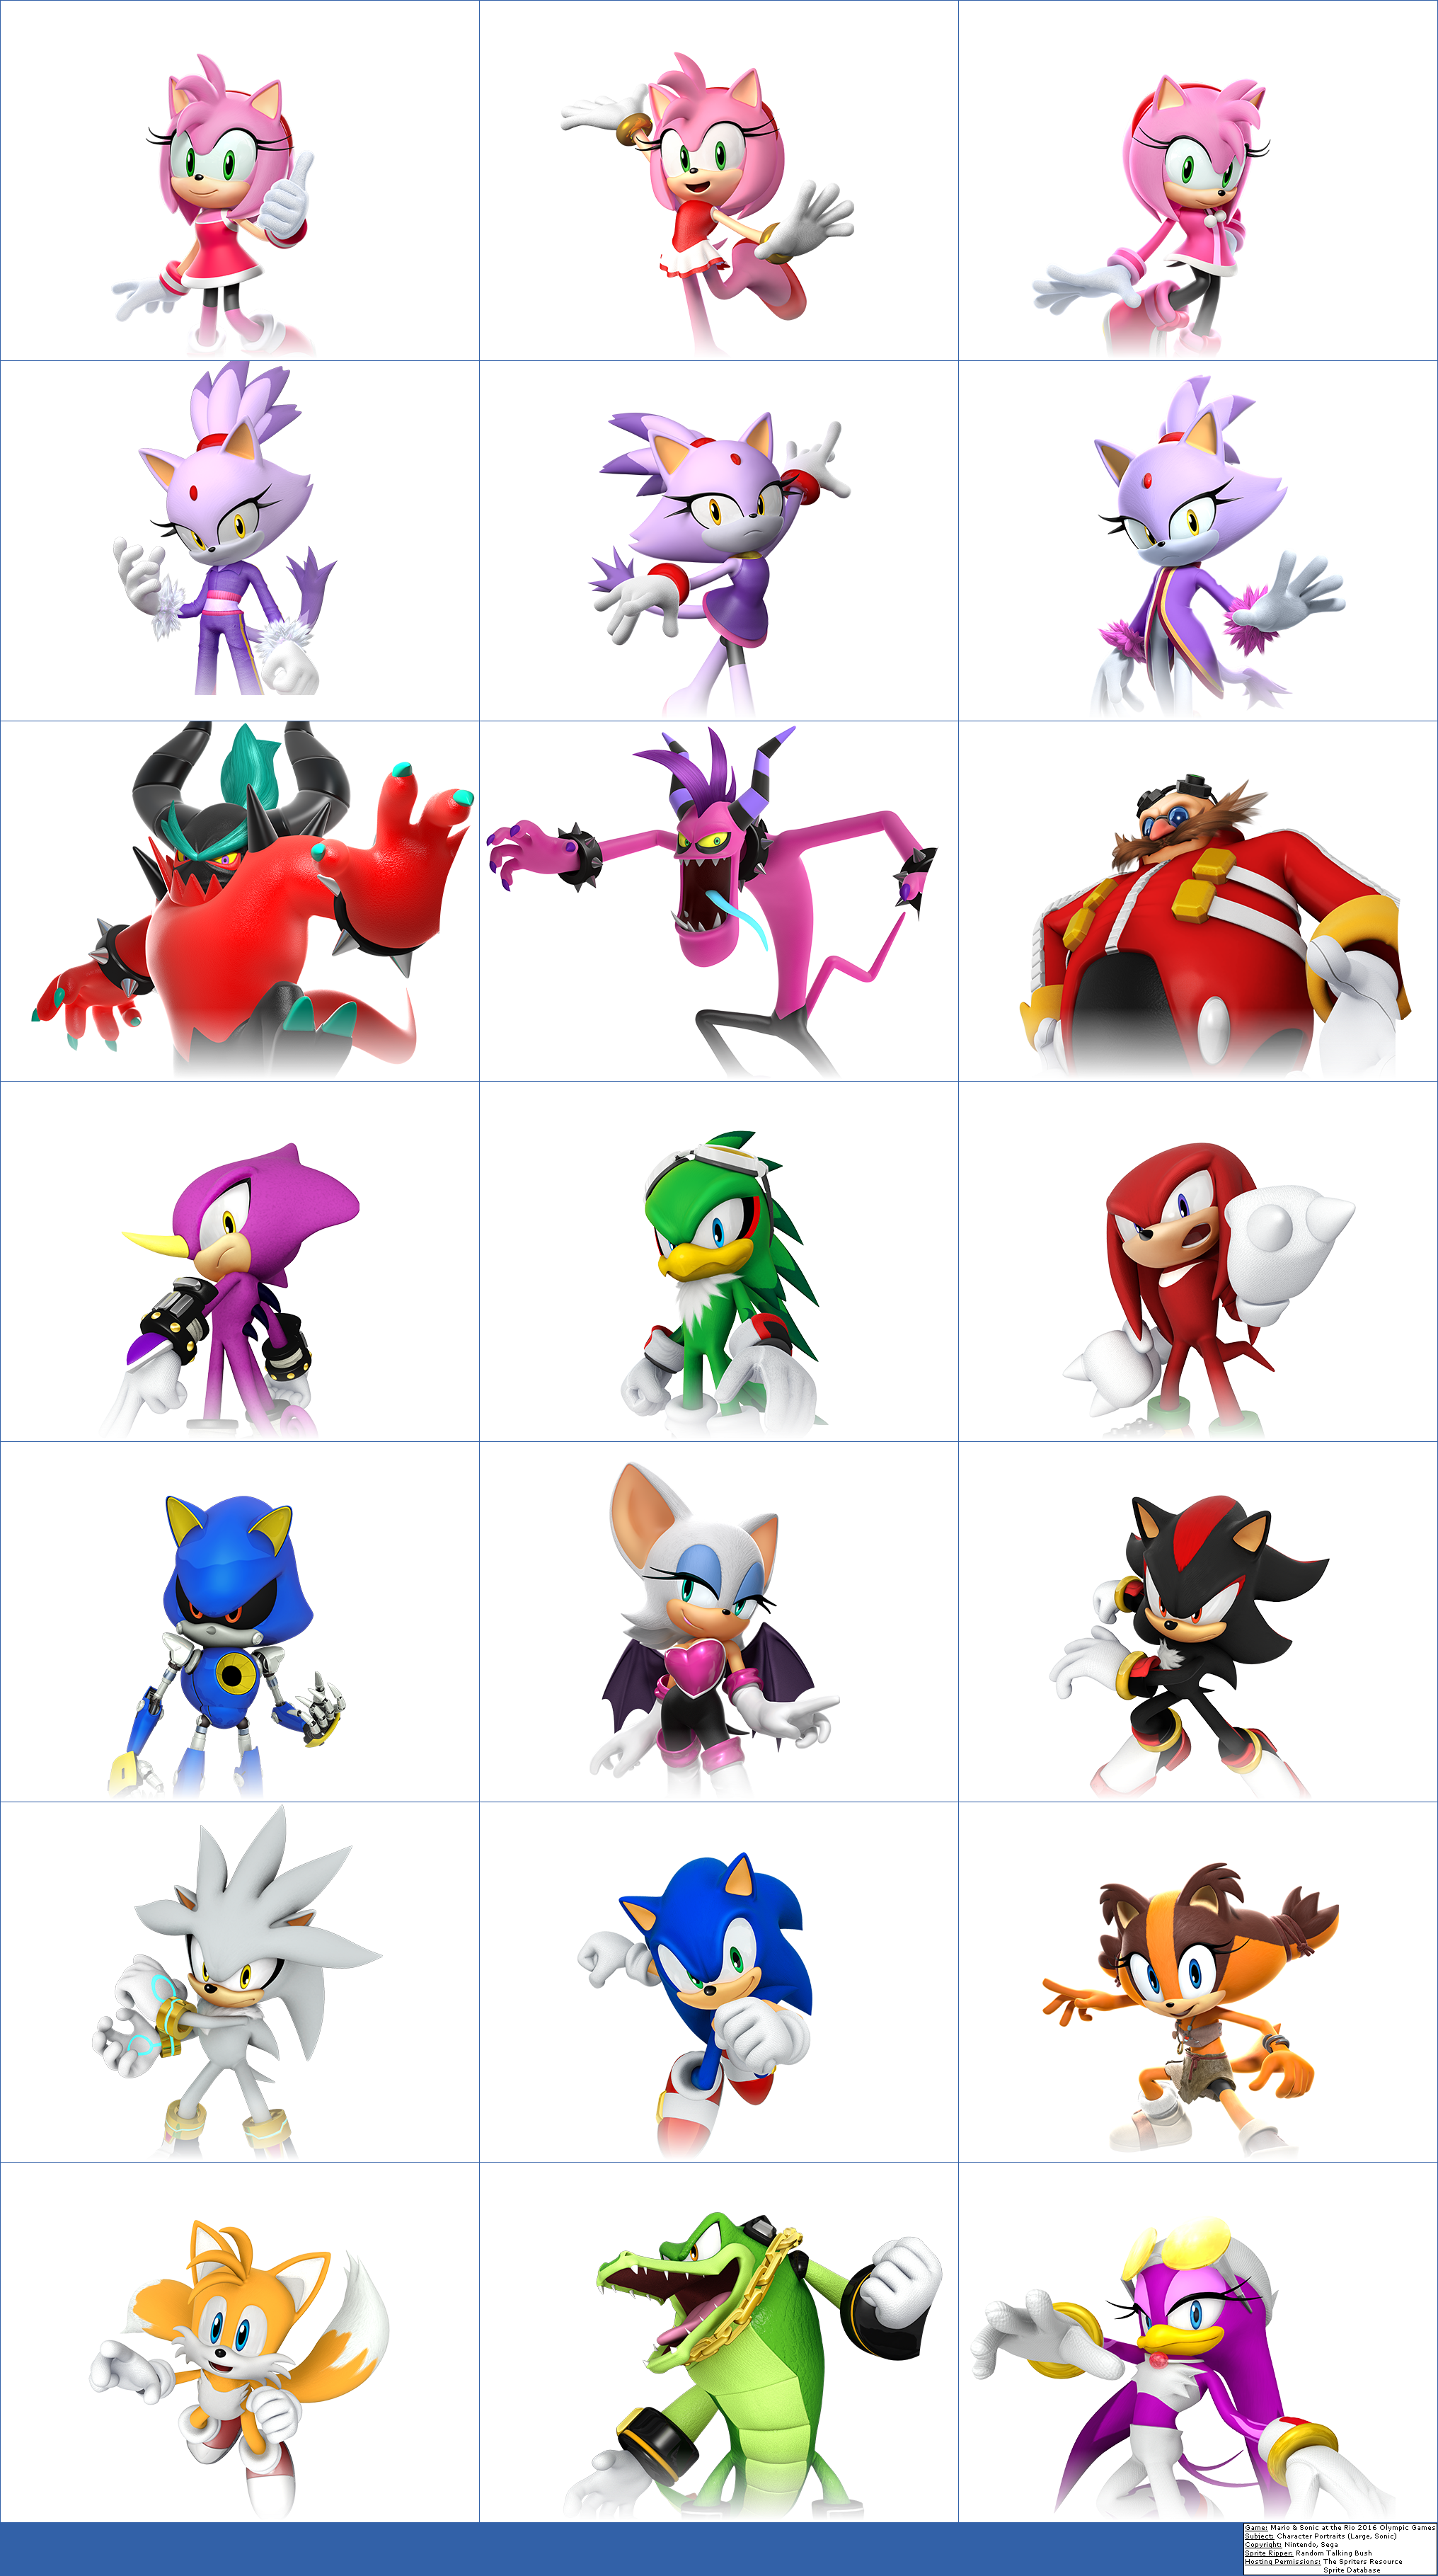 Mario & Sonic at the Rio 2016 Olympic Games - Character Portraits (Large, Sonic)